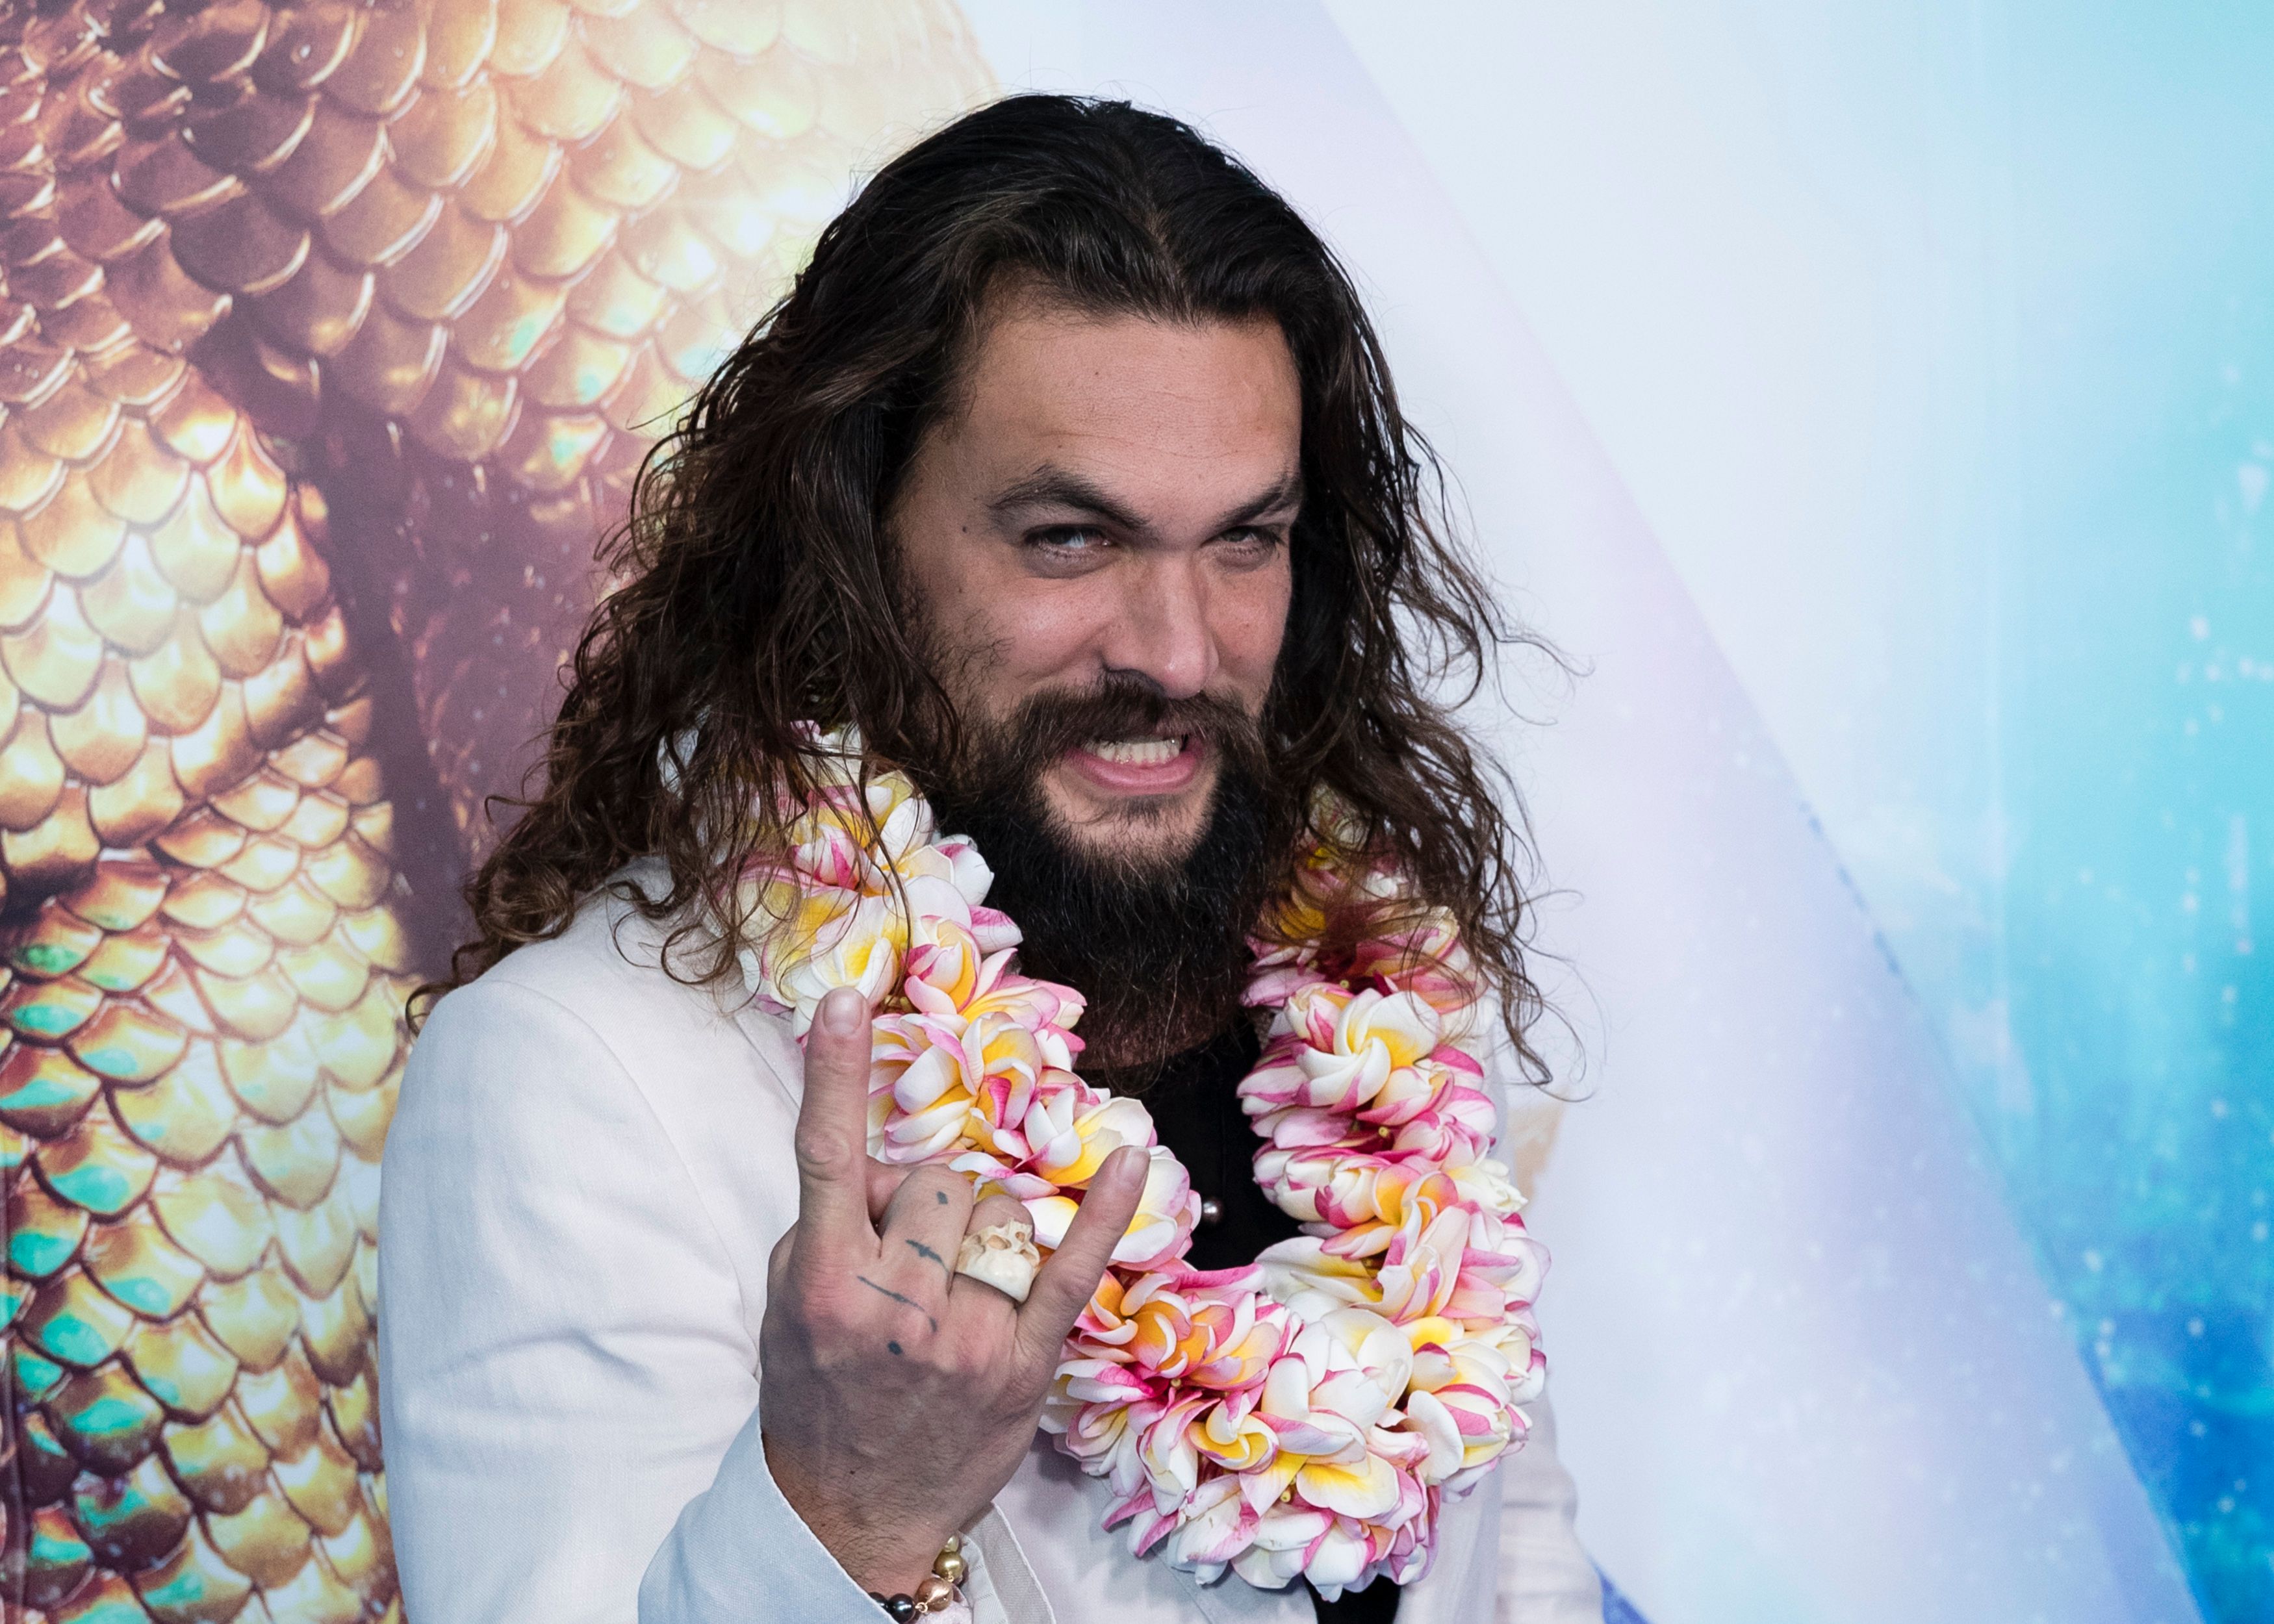 Jason Momoa during the Aquaman Sydney event at Event Cinemas George Street on December 19, 2018, in Sydney, Australia. | Source: Getty Images